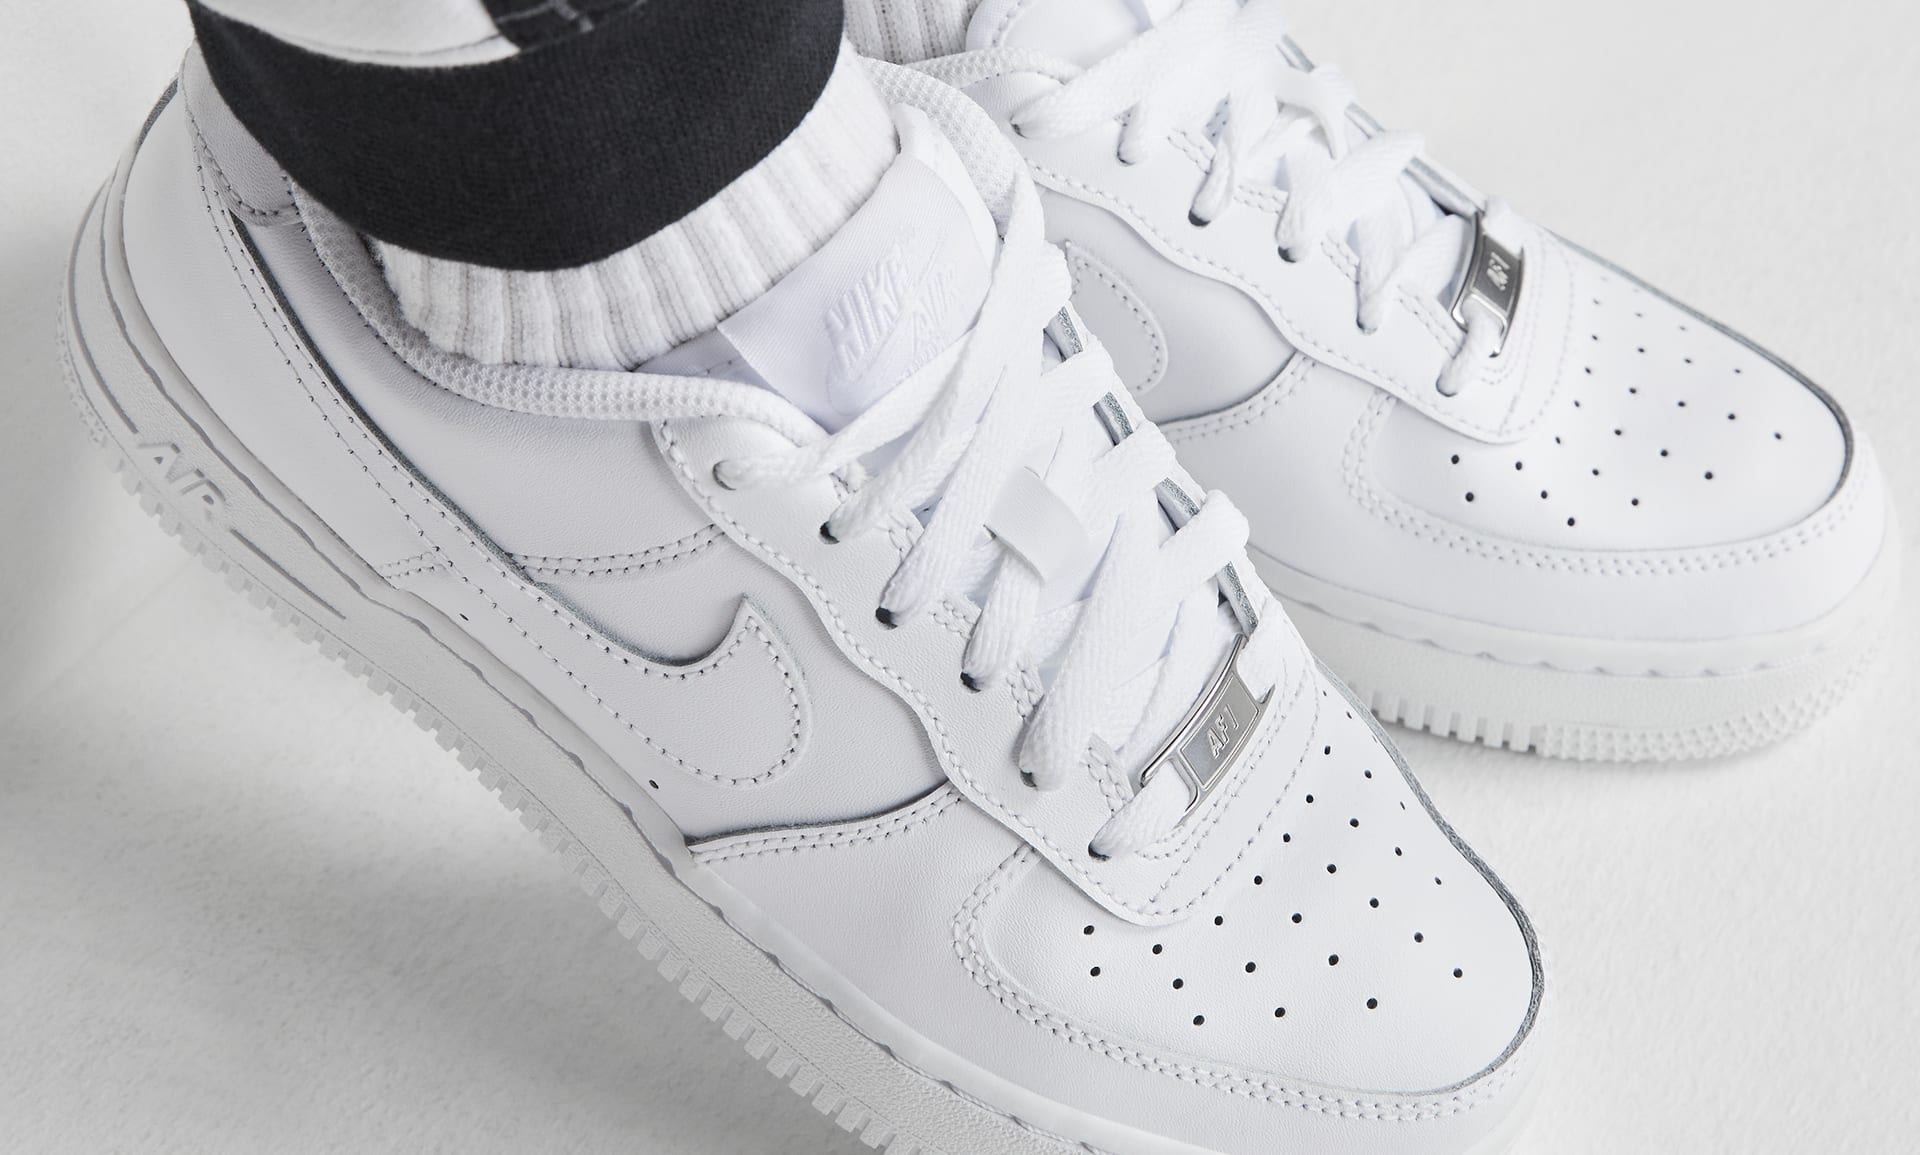 white air force 1 with black laces